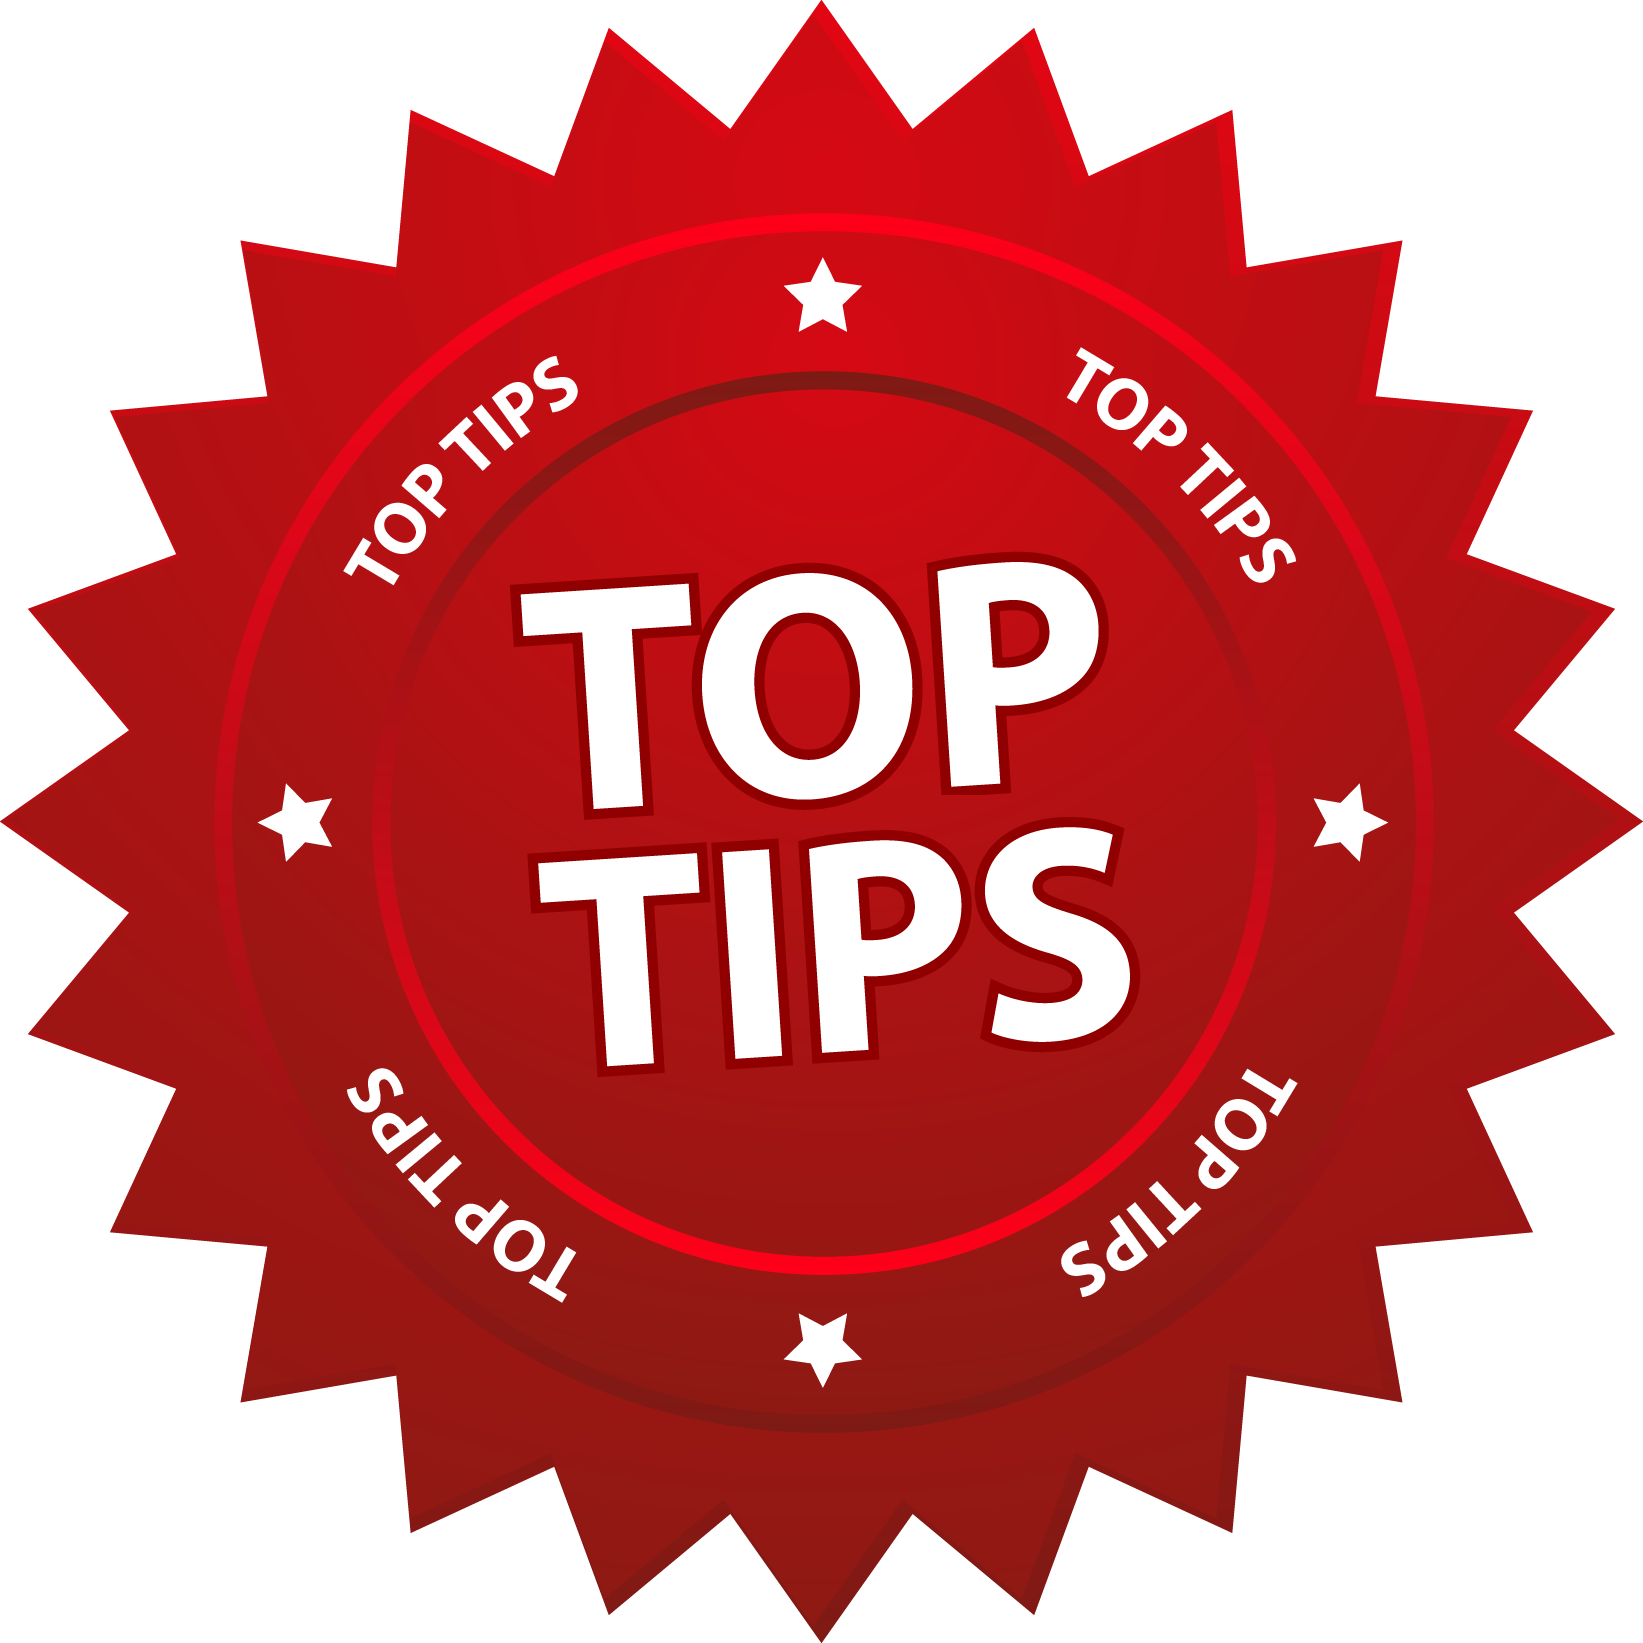 Top Tips to Score Highest Marks,tips for goods marks,top tips for 12 board exam,top tips for success in exam,top ten tips for 12 board exam